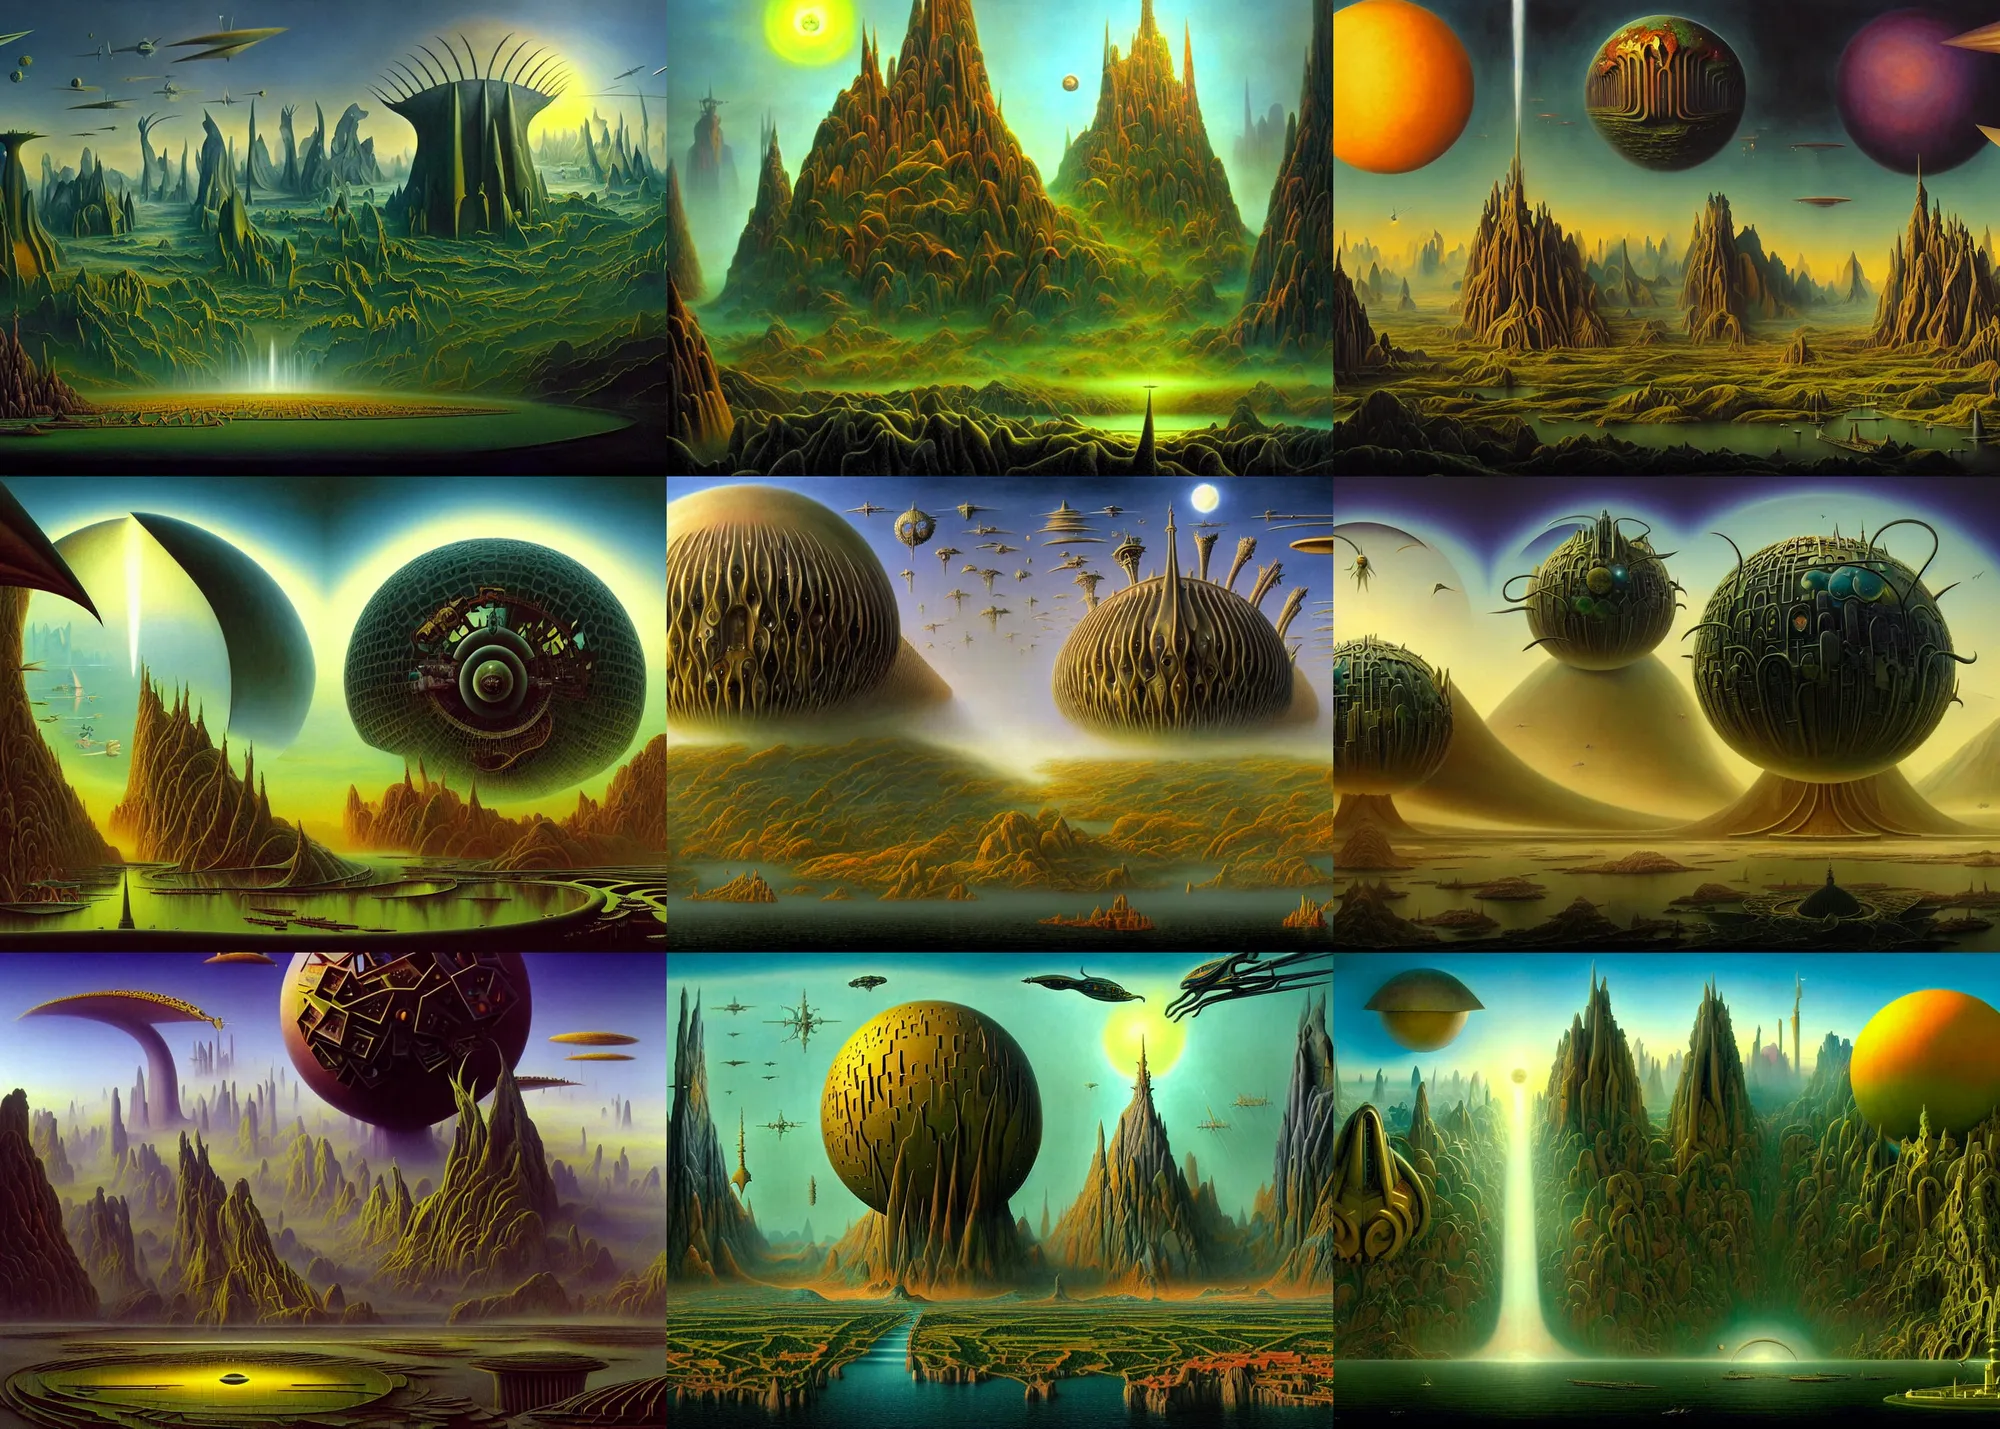 Prompt: a matte painting by Jim Burns and Noah Bradley and Heironymous Bosch and James Gurney of an advanced civilization with surreal architecture designed by Heironymous Bosch, mega structures inspired by Heironymous Bosch's Garden of Earthly Delights, glorious, surreal landscape, colorful, whimsical!!!, masterpiece!!, grand!, imaginative!!!, intricate details, sense of awe, elite, rich color palette, low contrast, featured on artstation, award winning